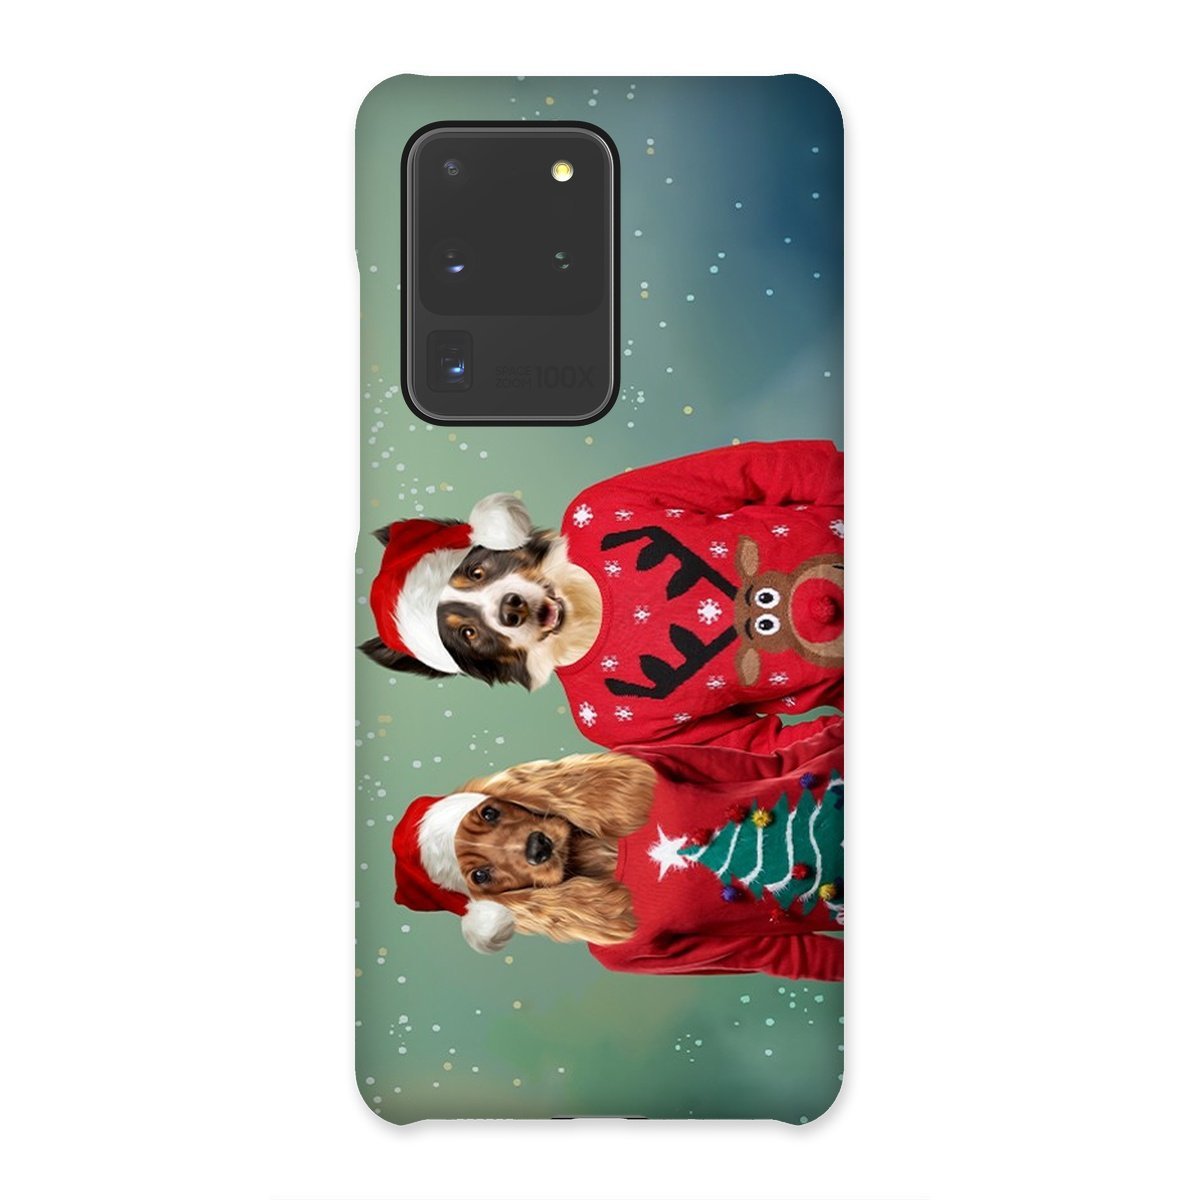 Christmas Jumper Duo: Custom Pet Phone Case - Paw & Glory - paw and glory, personalized dog phone case, pet phone case, personalised dog phone case uk, personalised cat phone case, dog phone case custom, personalised iphone 11 case dogs, Pet Portraits phone case,